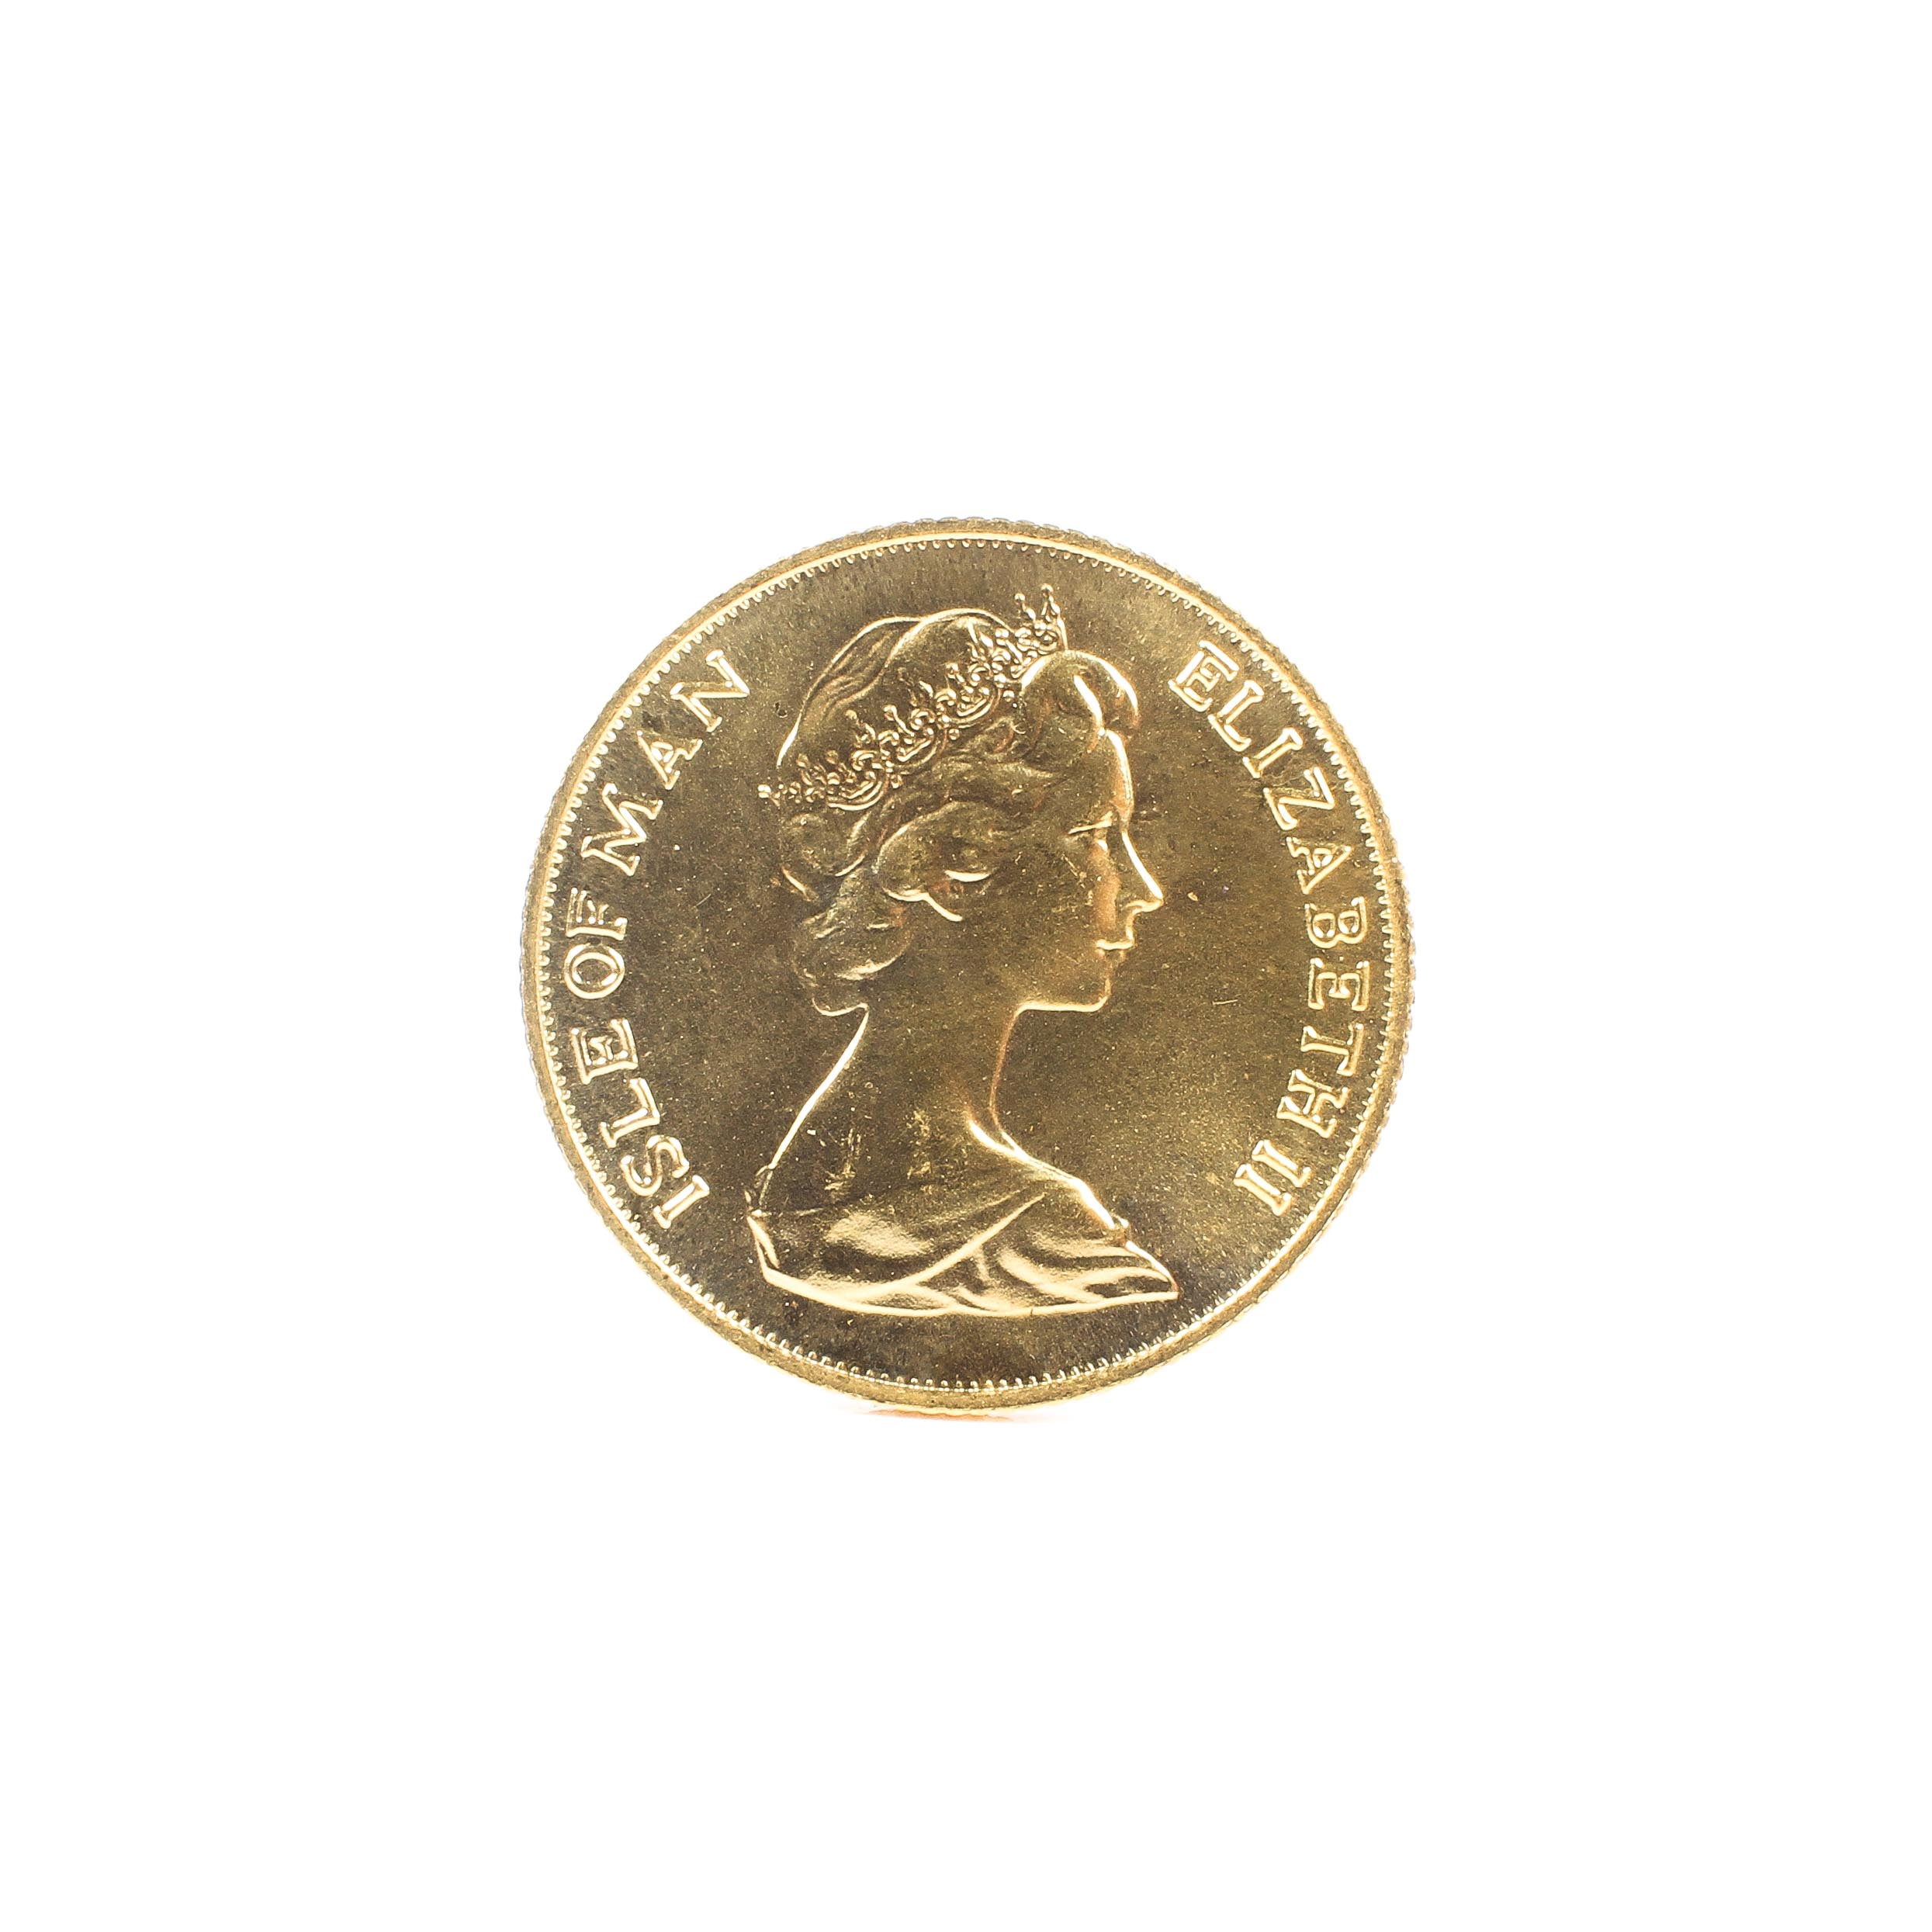 An Isle of Man 1973 Gold Sovereign 8.0g.